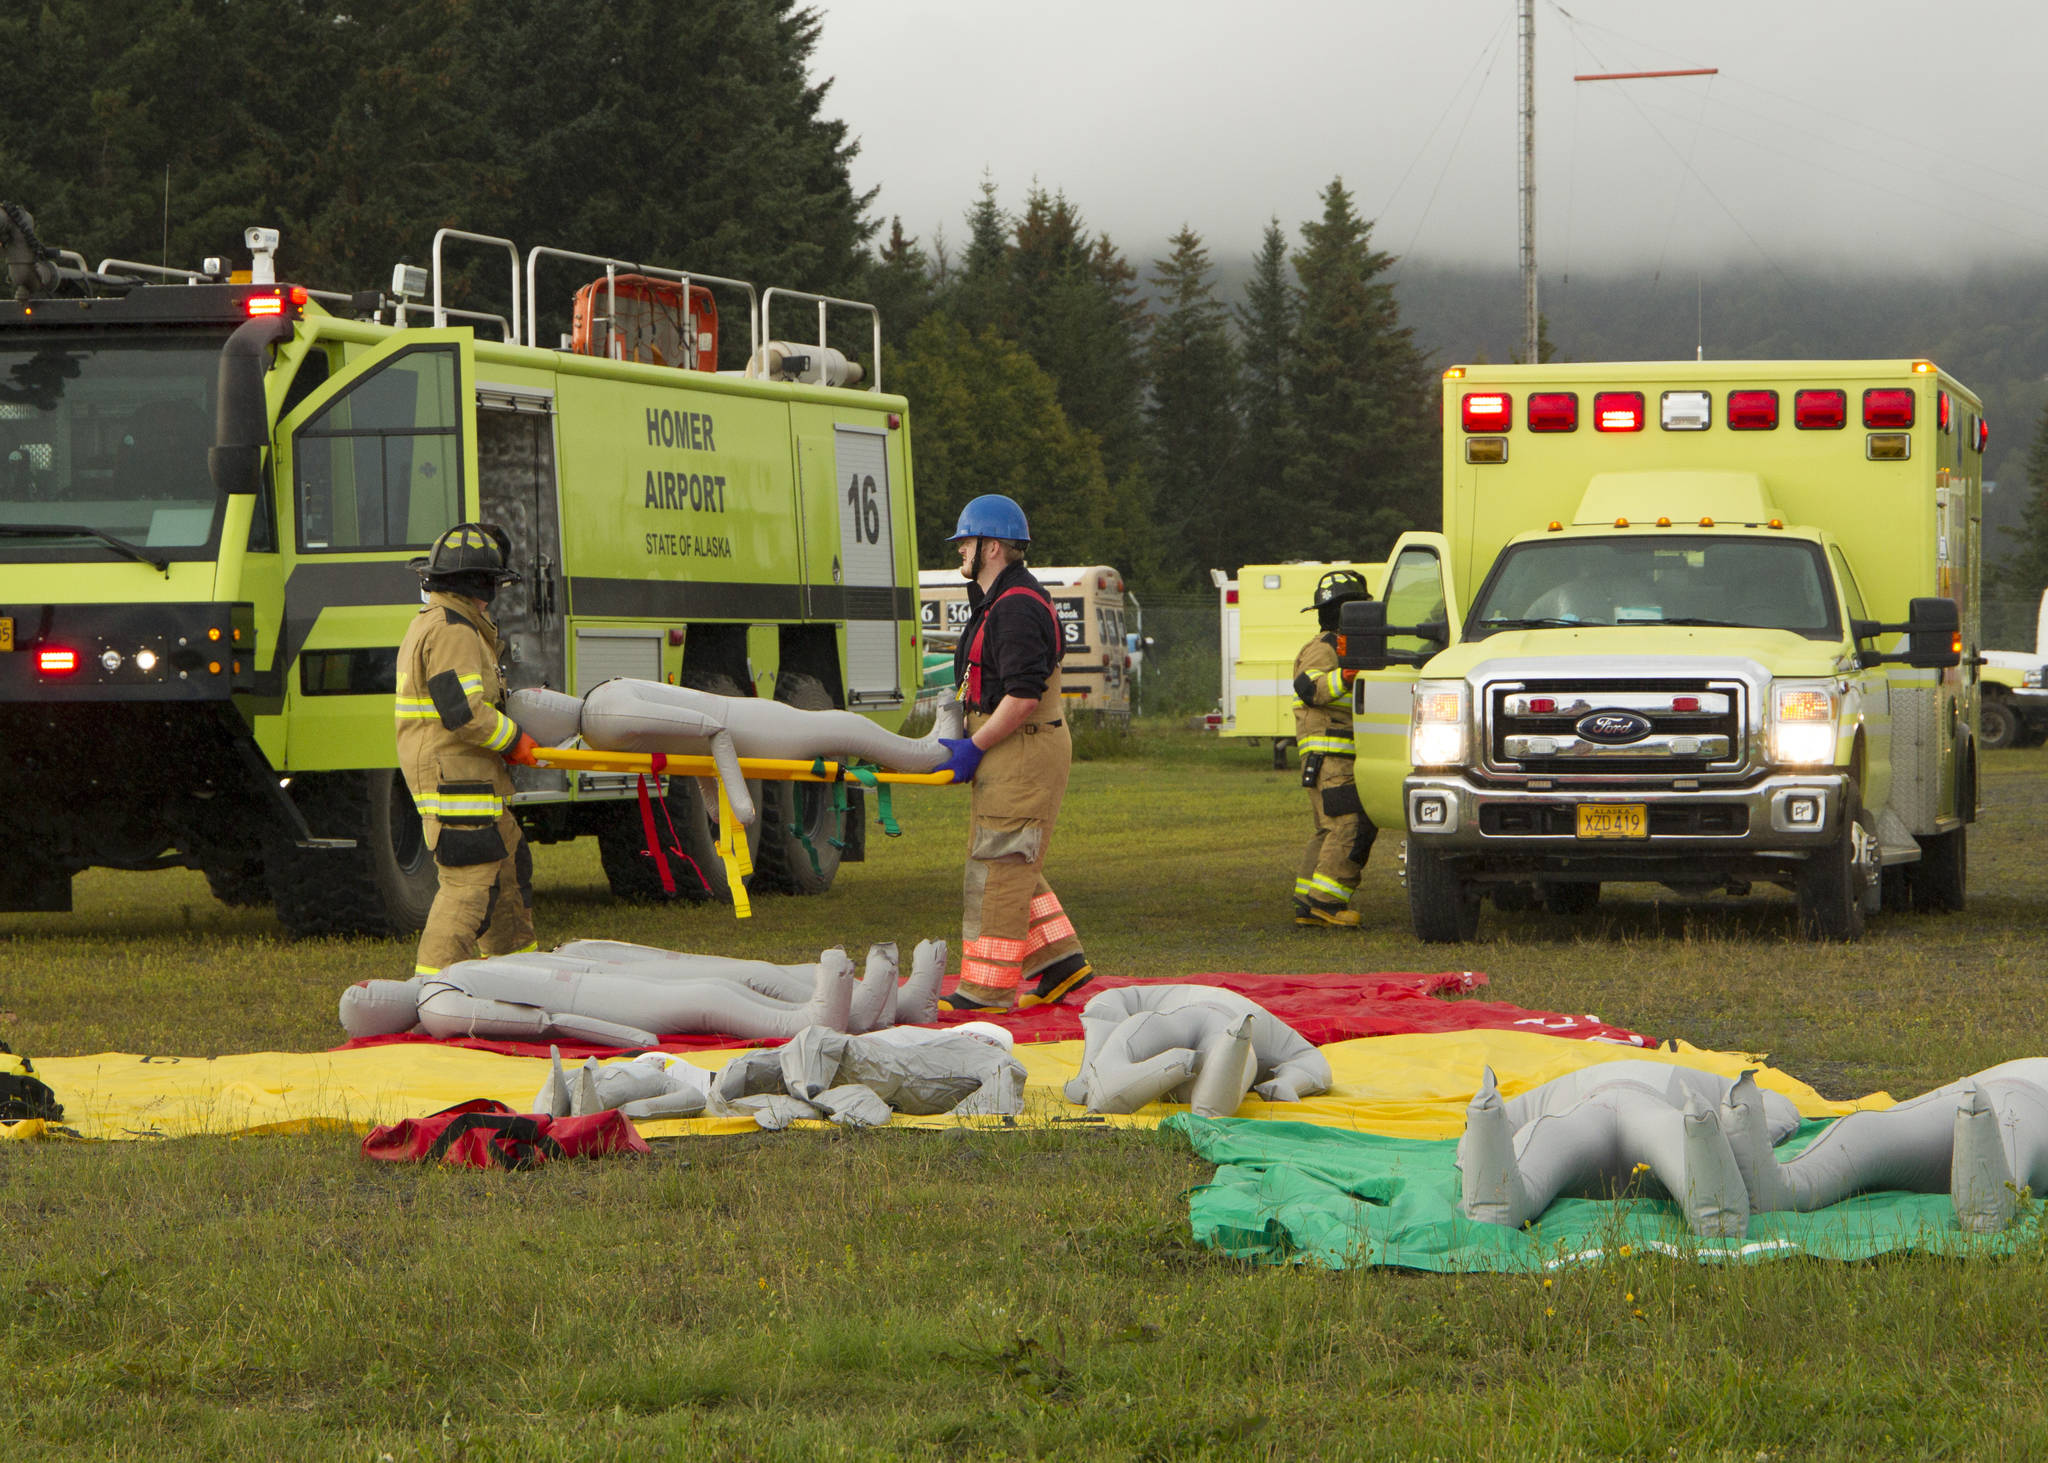 Emergency responders participate in a mass casualty emergency drill at Homer Airport on Tuesday, Aug. 24. The responders were responsible for recovering victims from a mock plane crash, triaging and transporting them to medical facilities. (Photo by Sarah Knapp/Homer News)